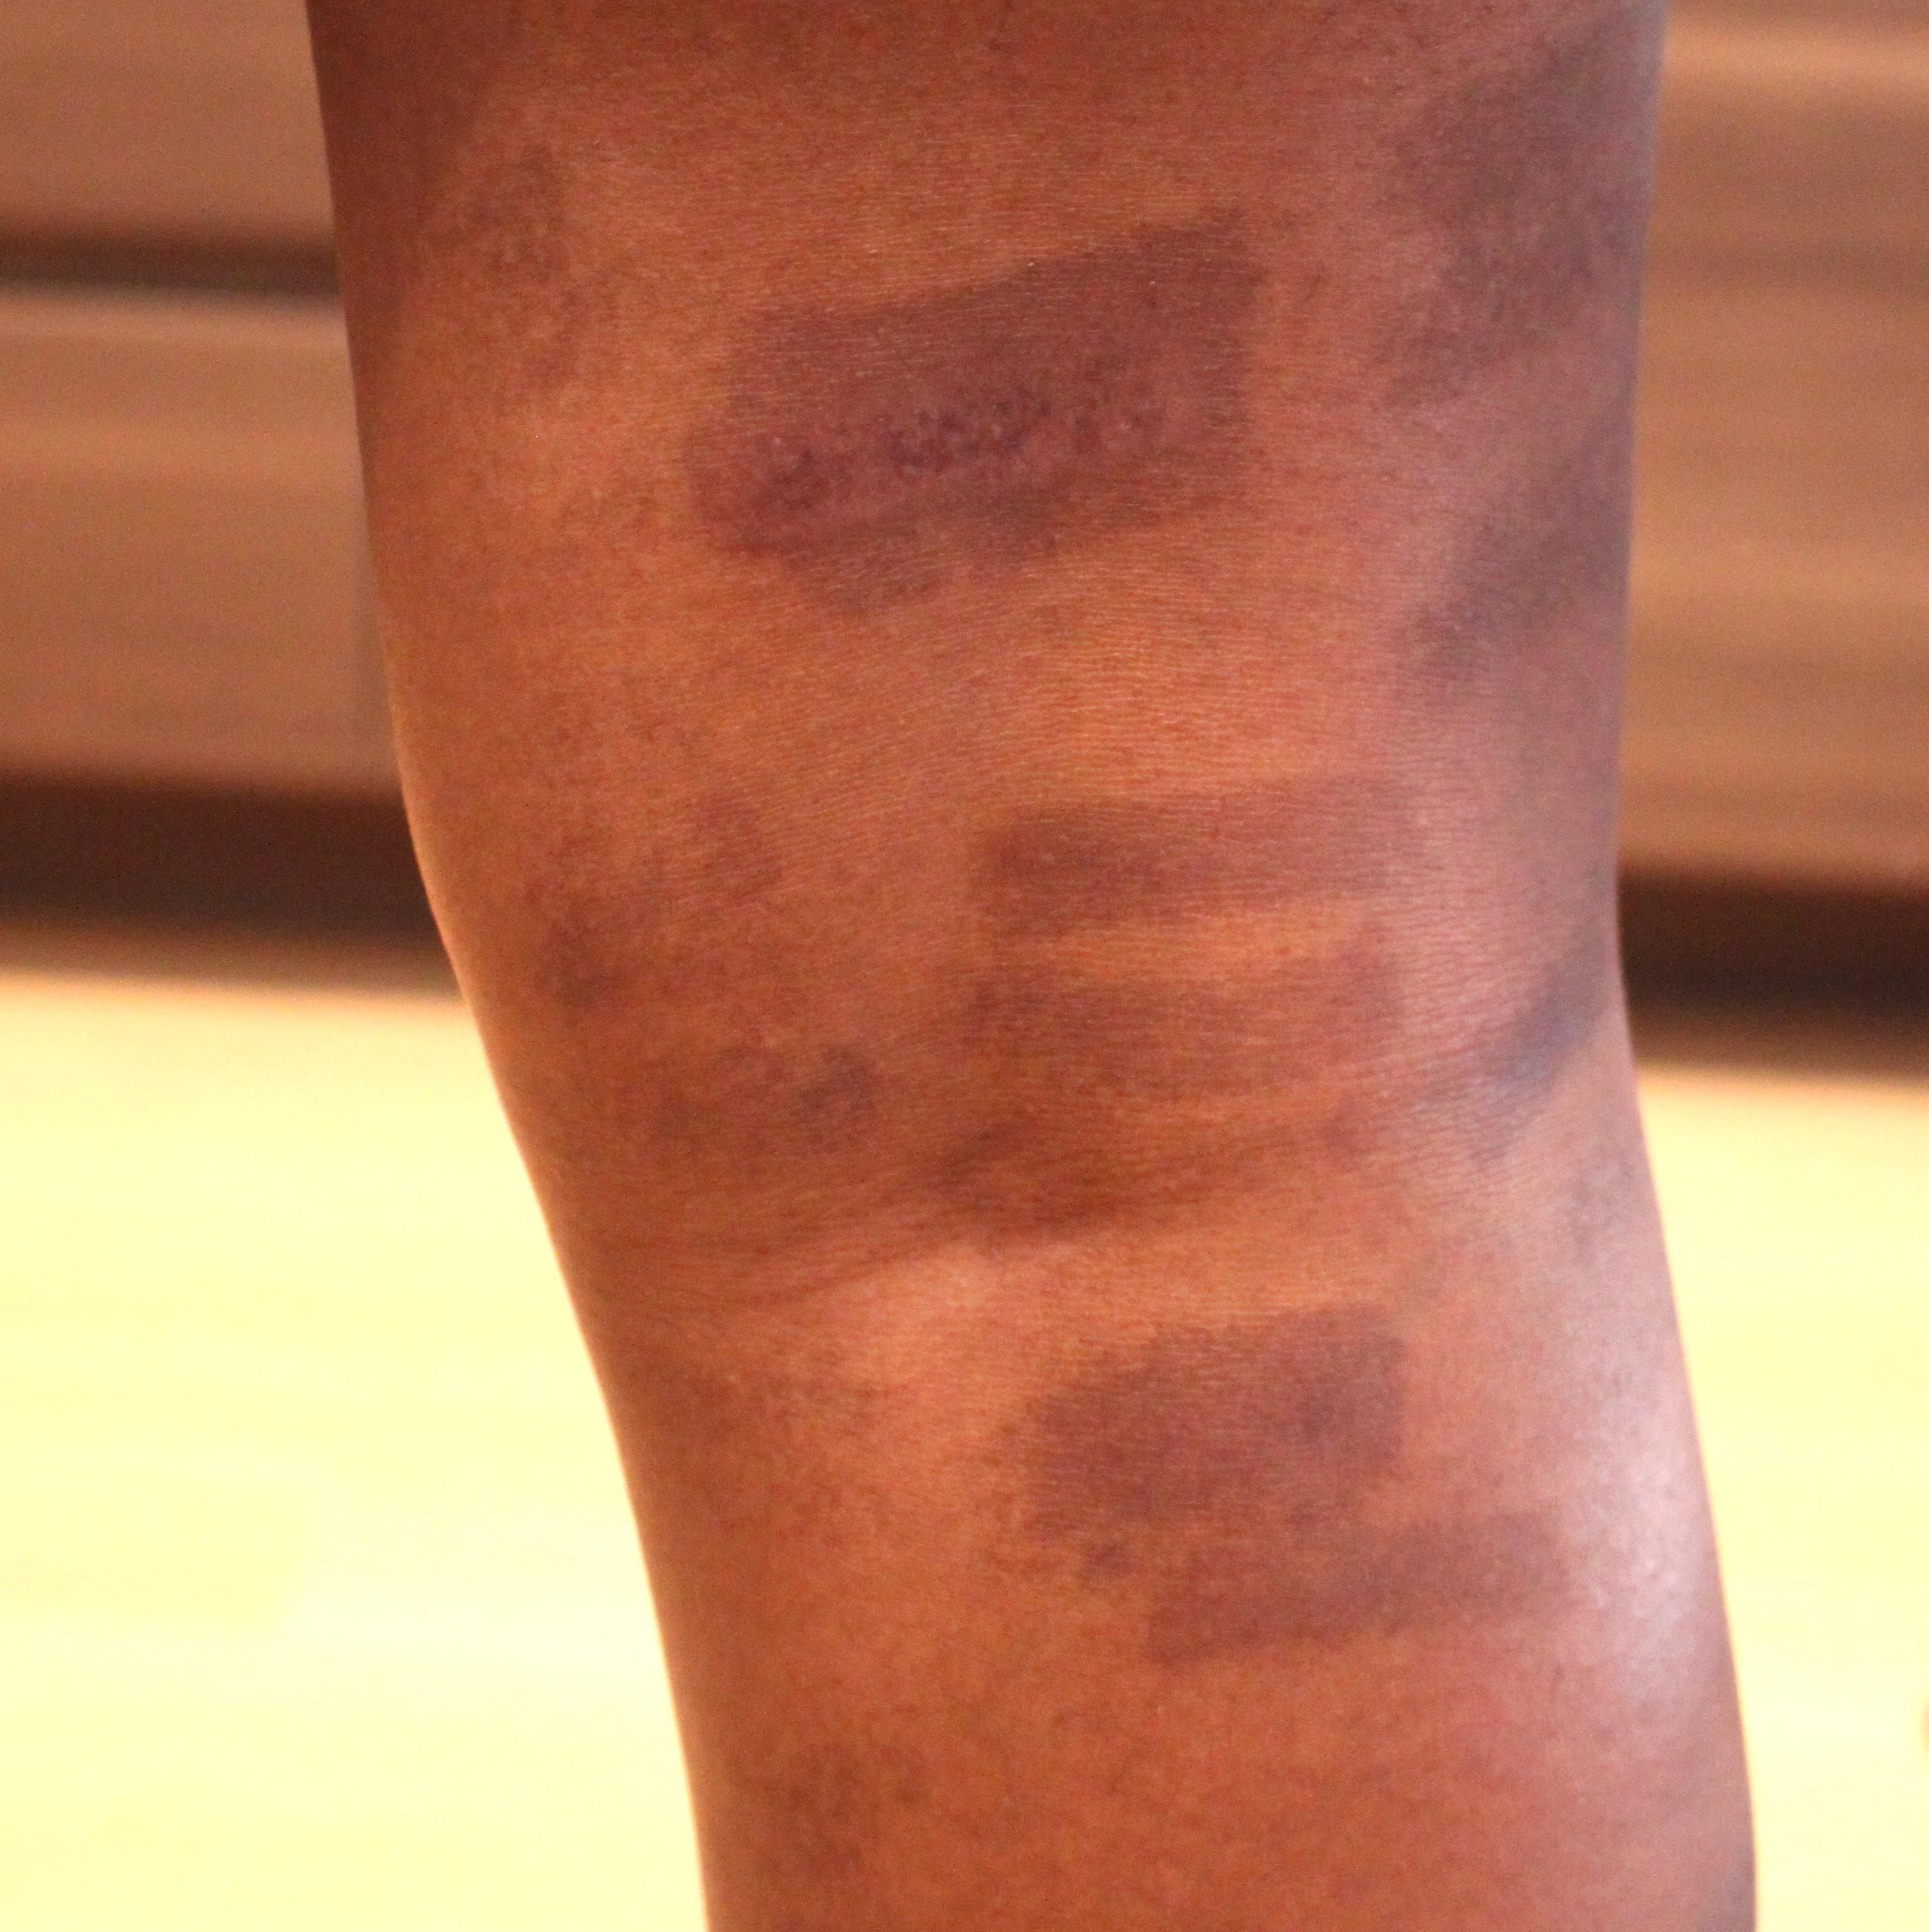 post-inflammatory pigmentation following laser hair removal